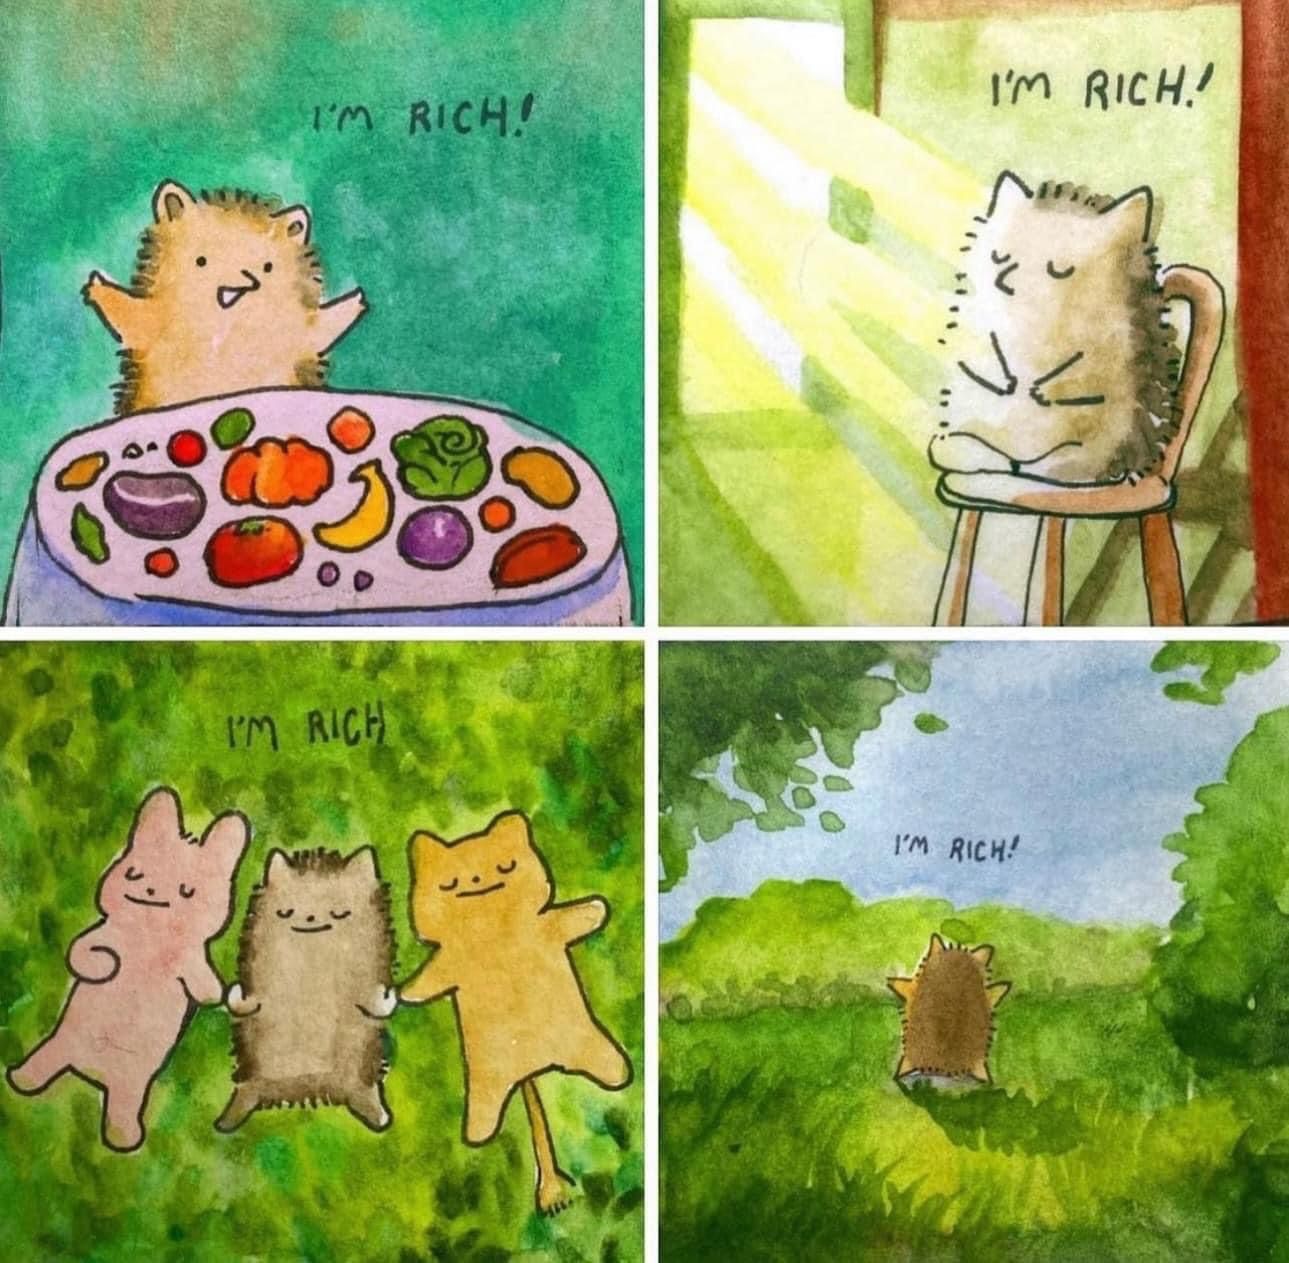 Cartoon hedgehog, saying "I'M RICH", panel top left with table full of colourful veg, top right sitting peacefully on chair basked in sunrays, bottom left lying on grass holding hands with 2 friends, bottom right, looking out across green meadow to green <br />trees